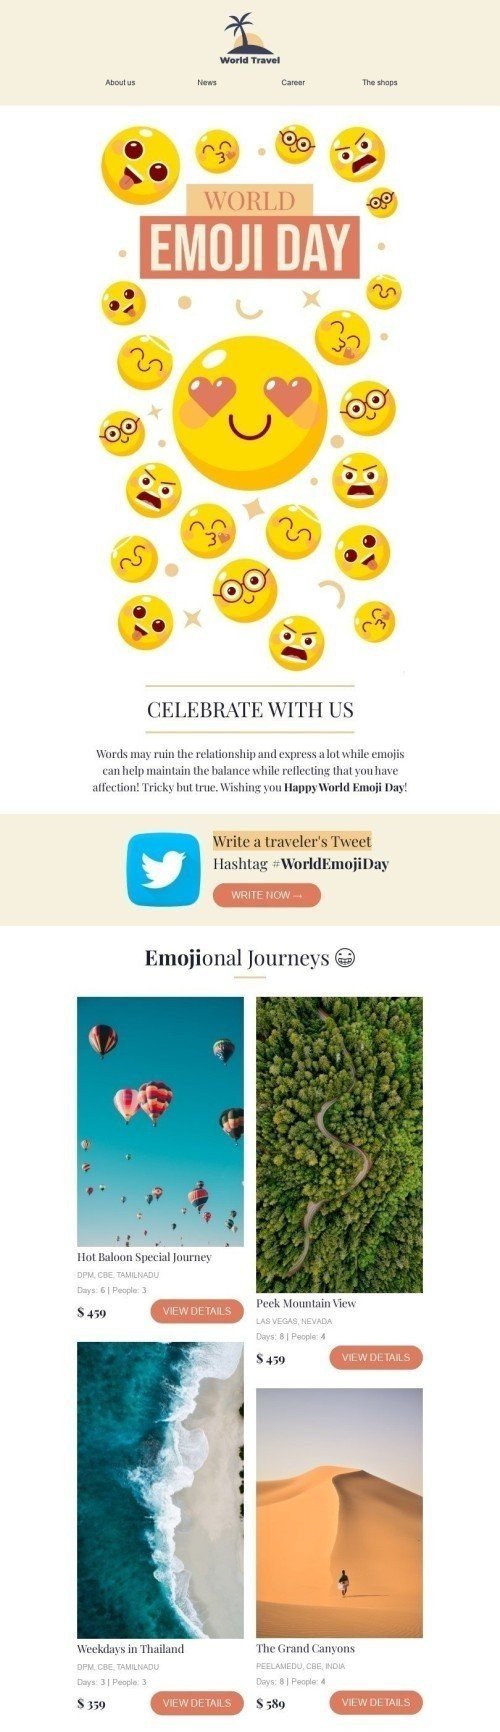 World Emoji Day Email Template "Write a traveler's Tweet" for Travel industry mobile view